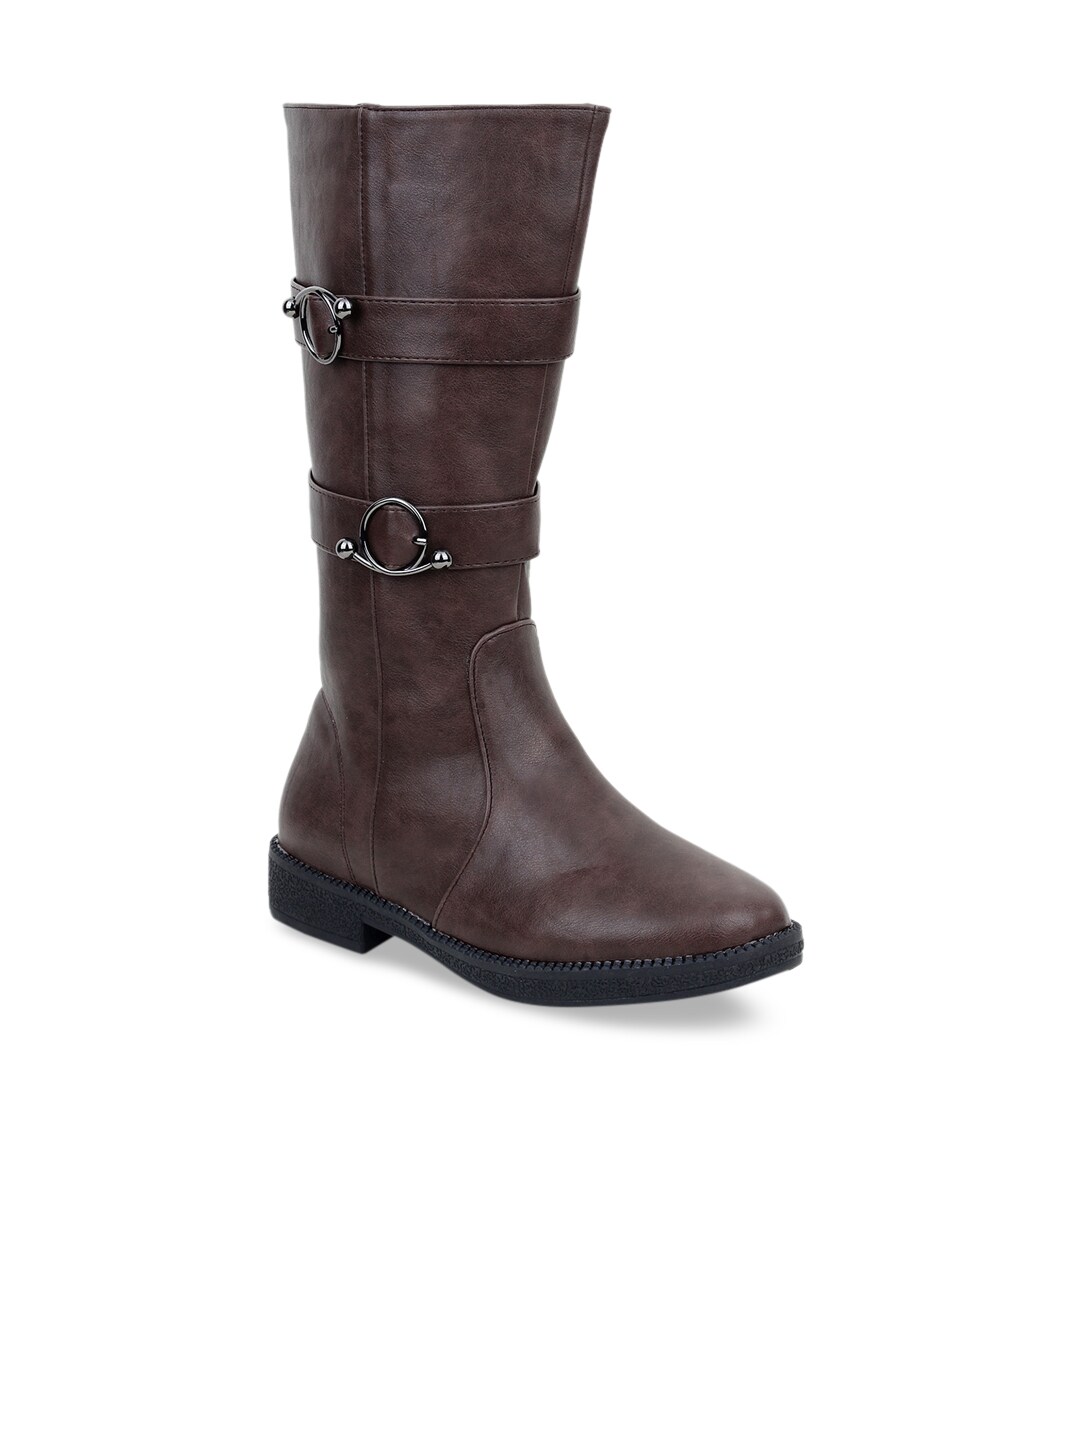 MSC Women Brown Woven Design Heeled Boots Price in India